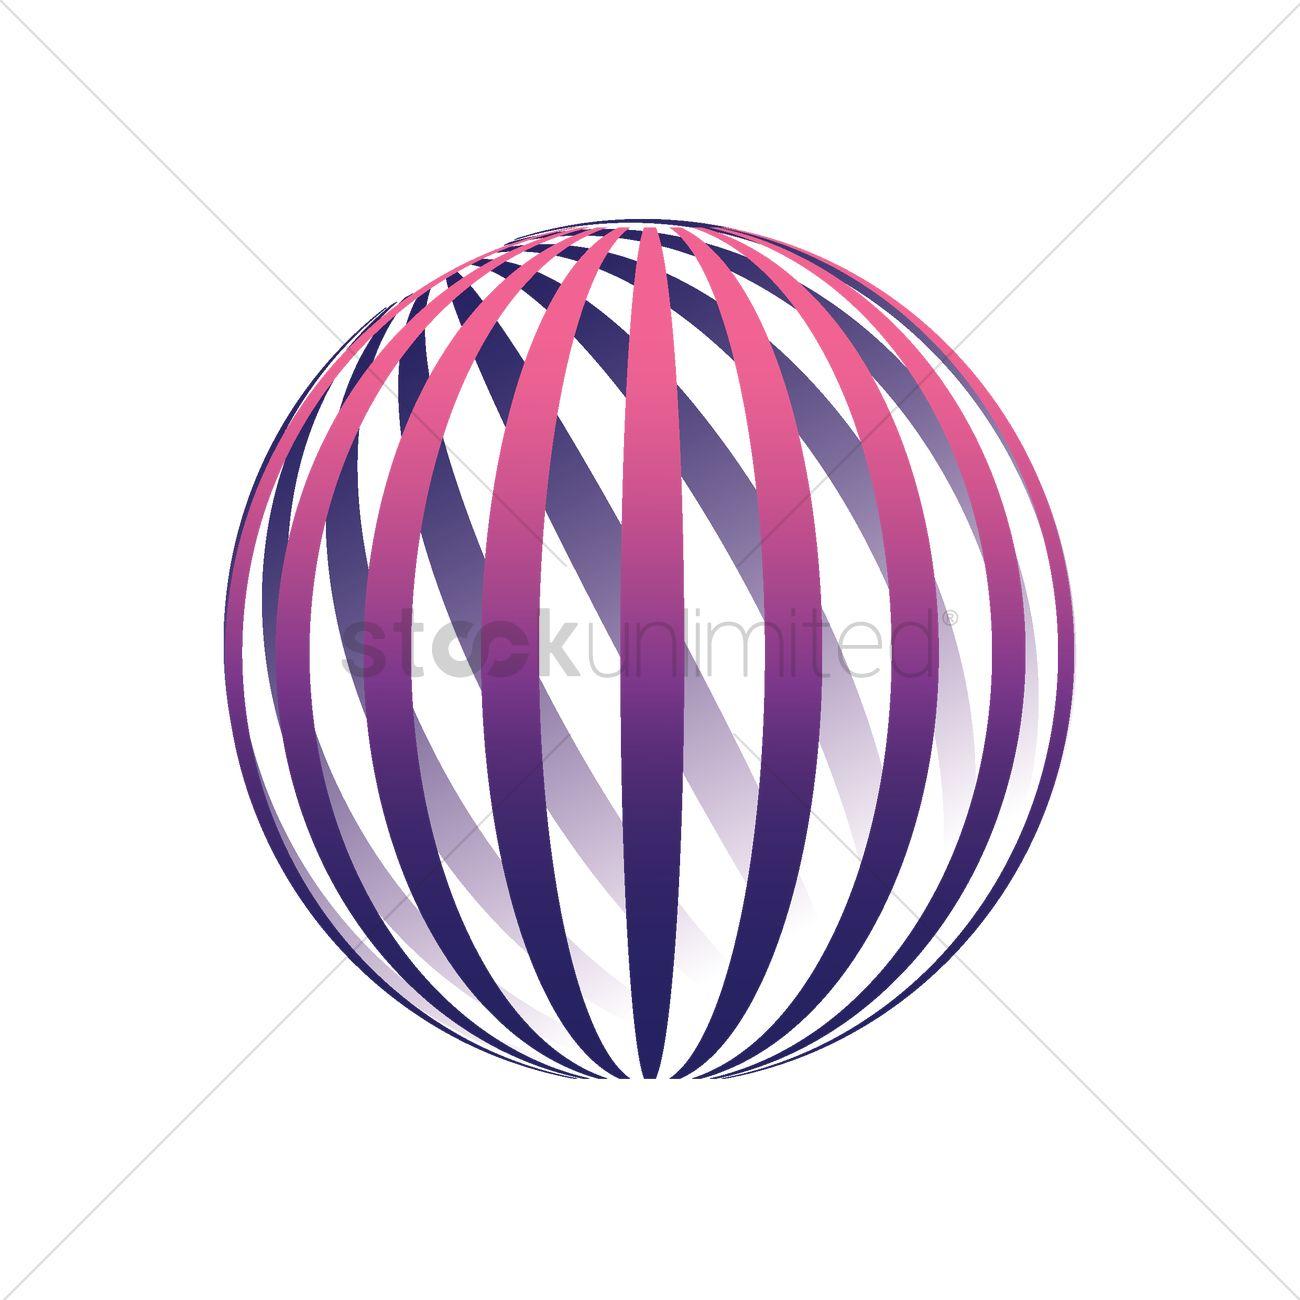 Globe with Lines Logo - Globe logo element with lines Vector Image